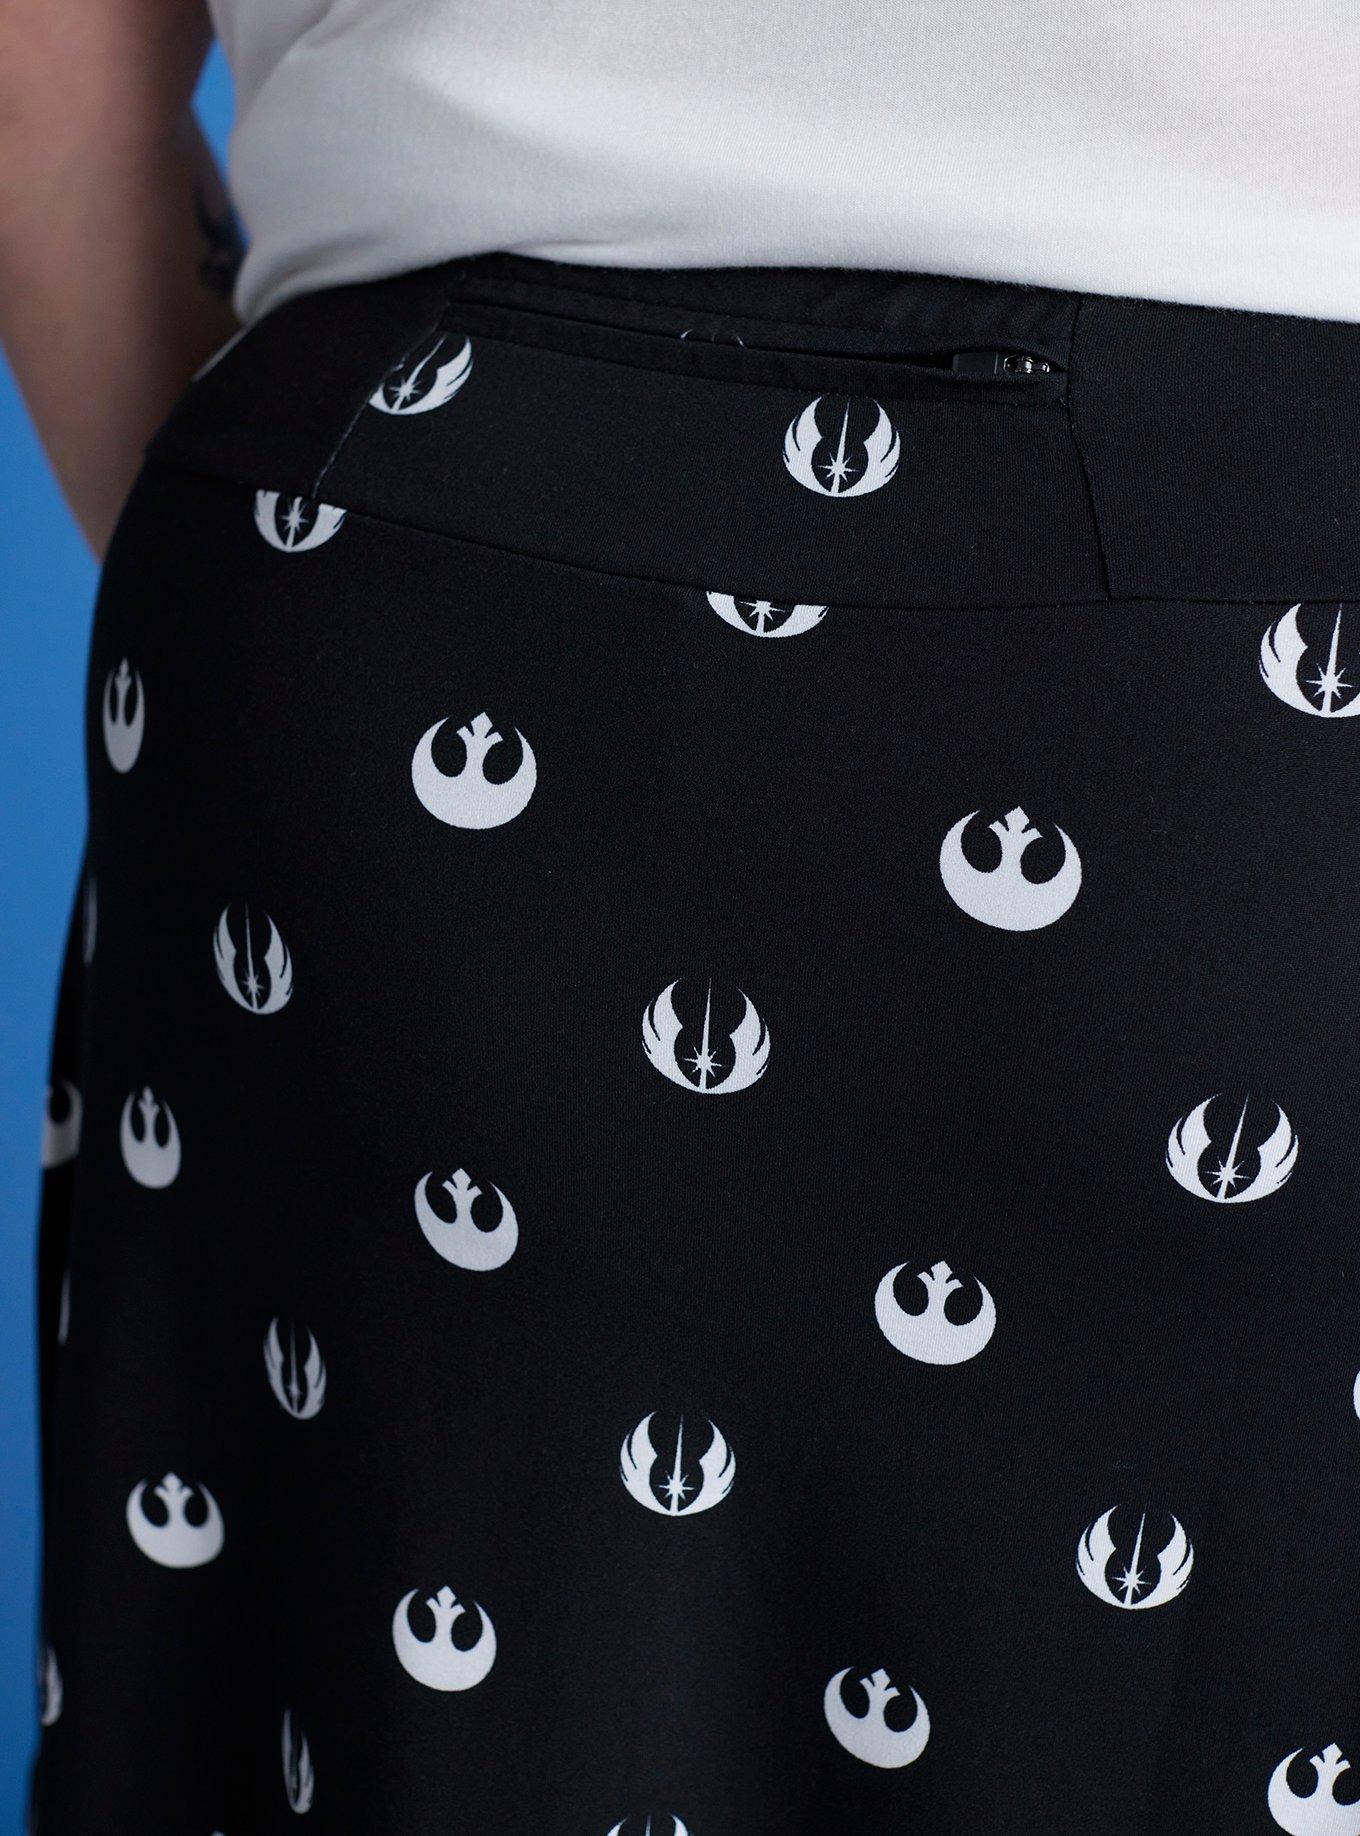 Her Universe Star Wars Icons Asymmetrical Athletic Skort Plus Size Her Universe Exclusive, BLACK  WHITE, alternate